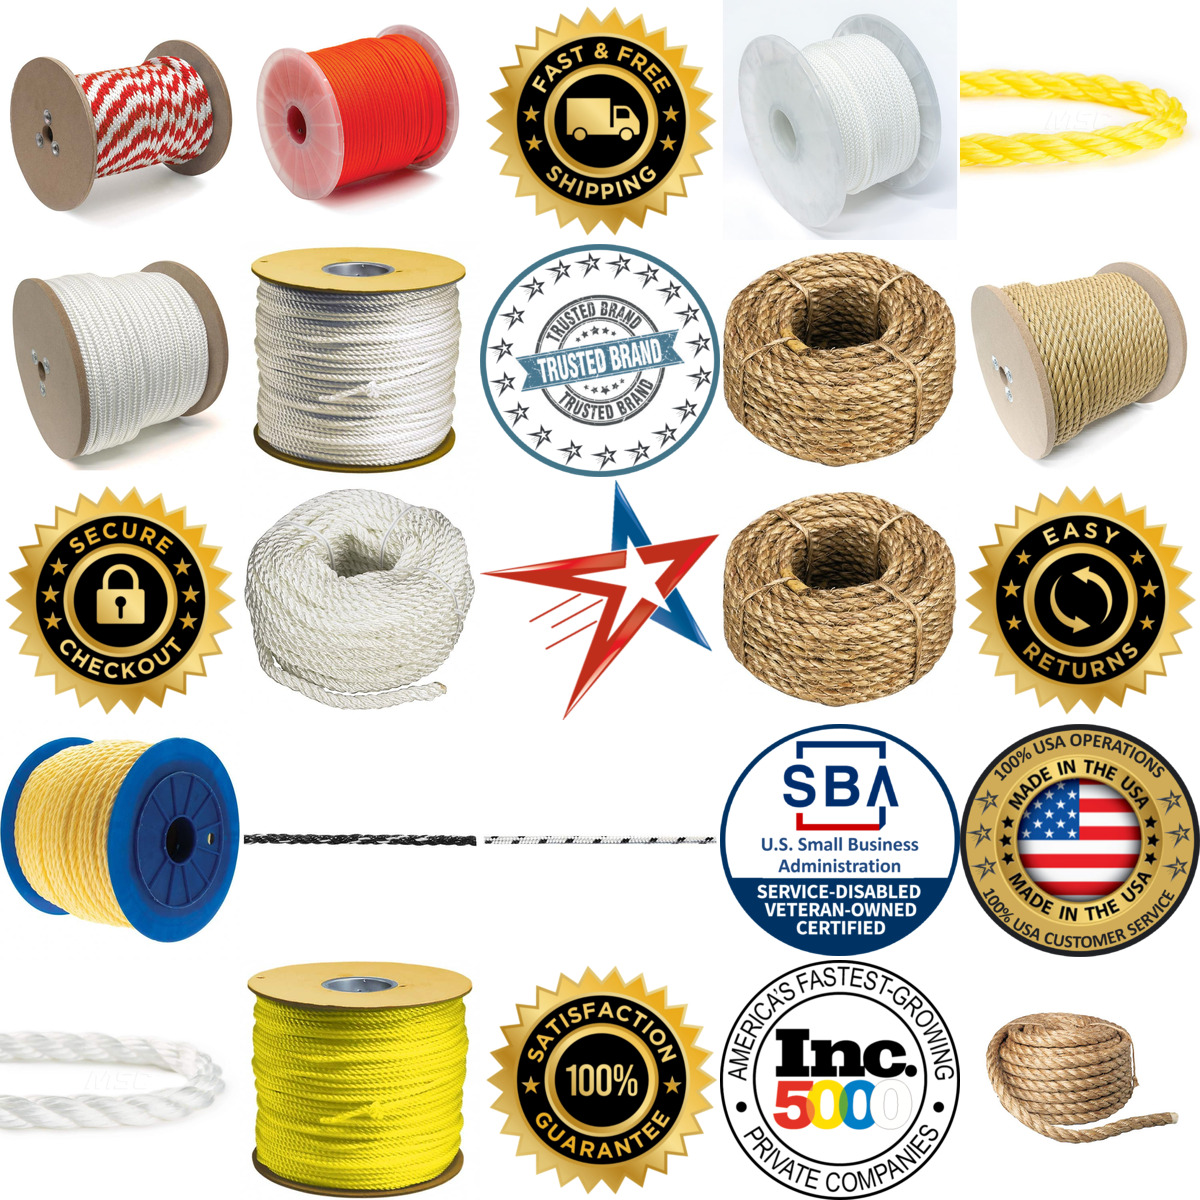 A selection of Rope products on GoVets